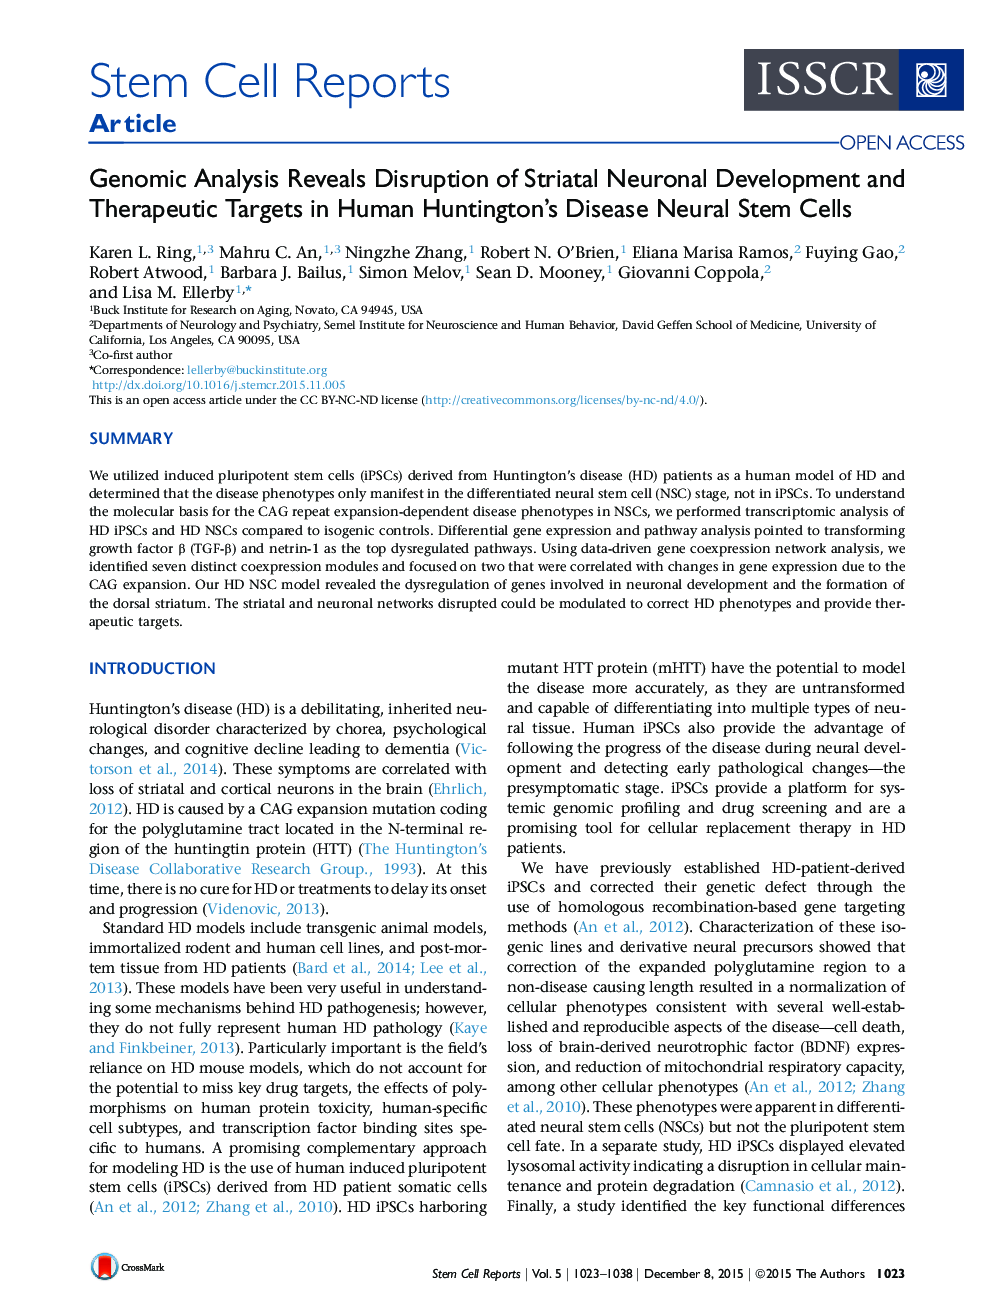 Genomic Analysis Reveals Disruption of Striatal Neuronal Development and Therapeutic Targets in Human Huntington’s Disease Neural Stem Cells 